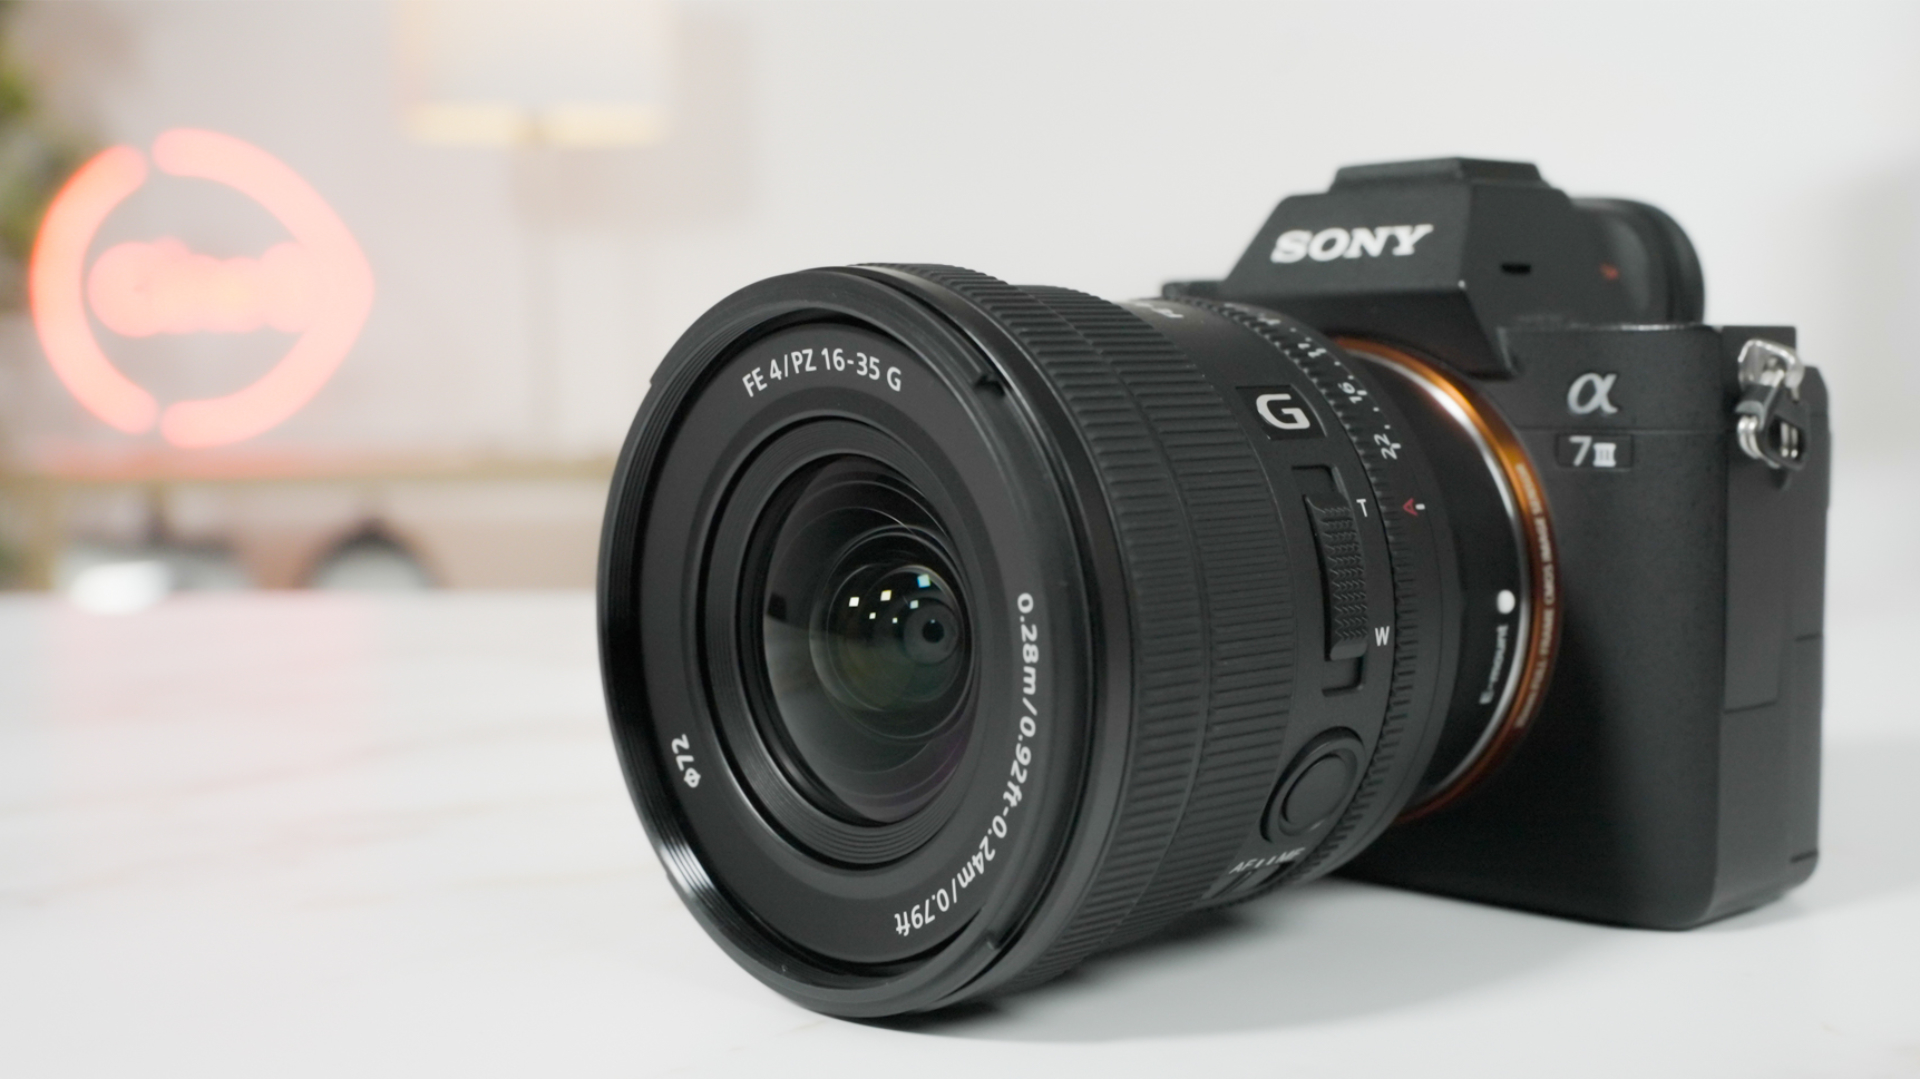 Sony FE PZ 16-35 f/4 G Zoom Lens Announced – with Electronic Zoom Controls